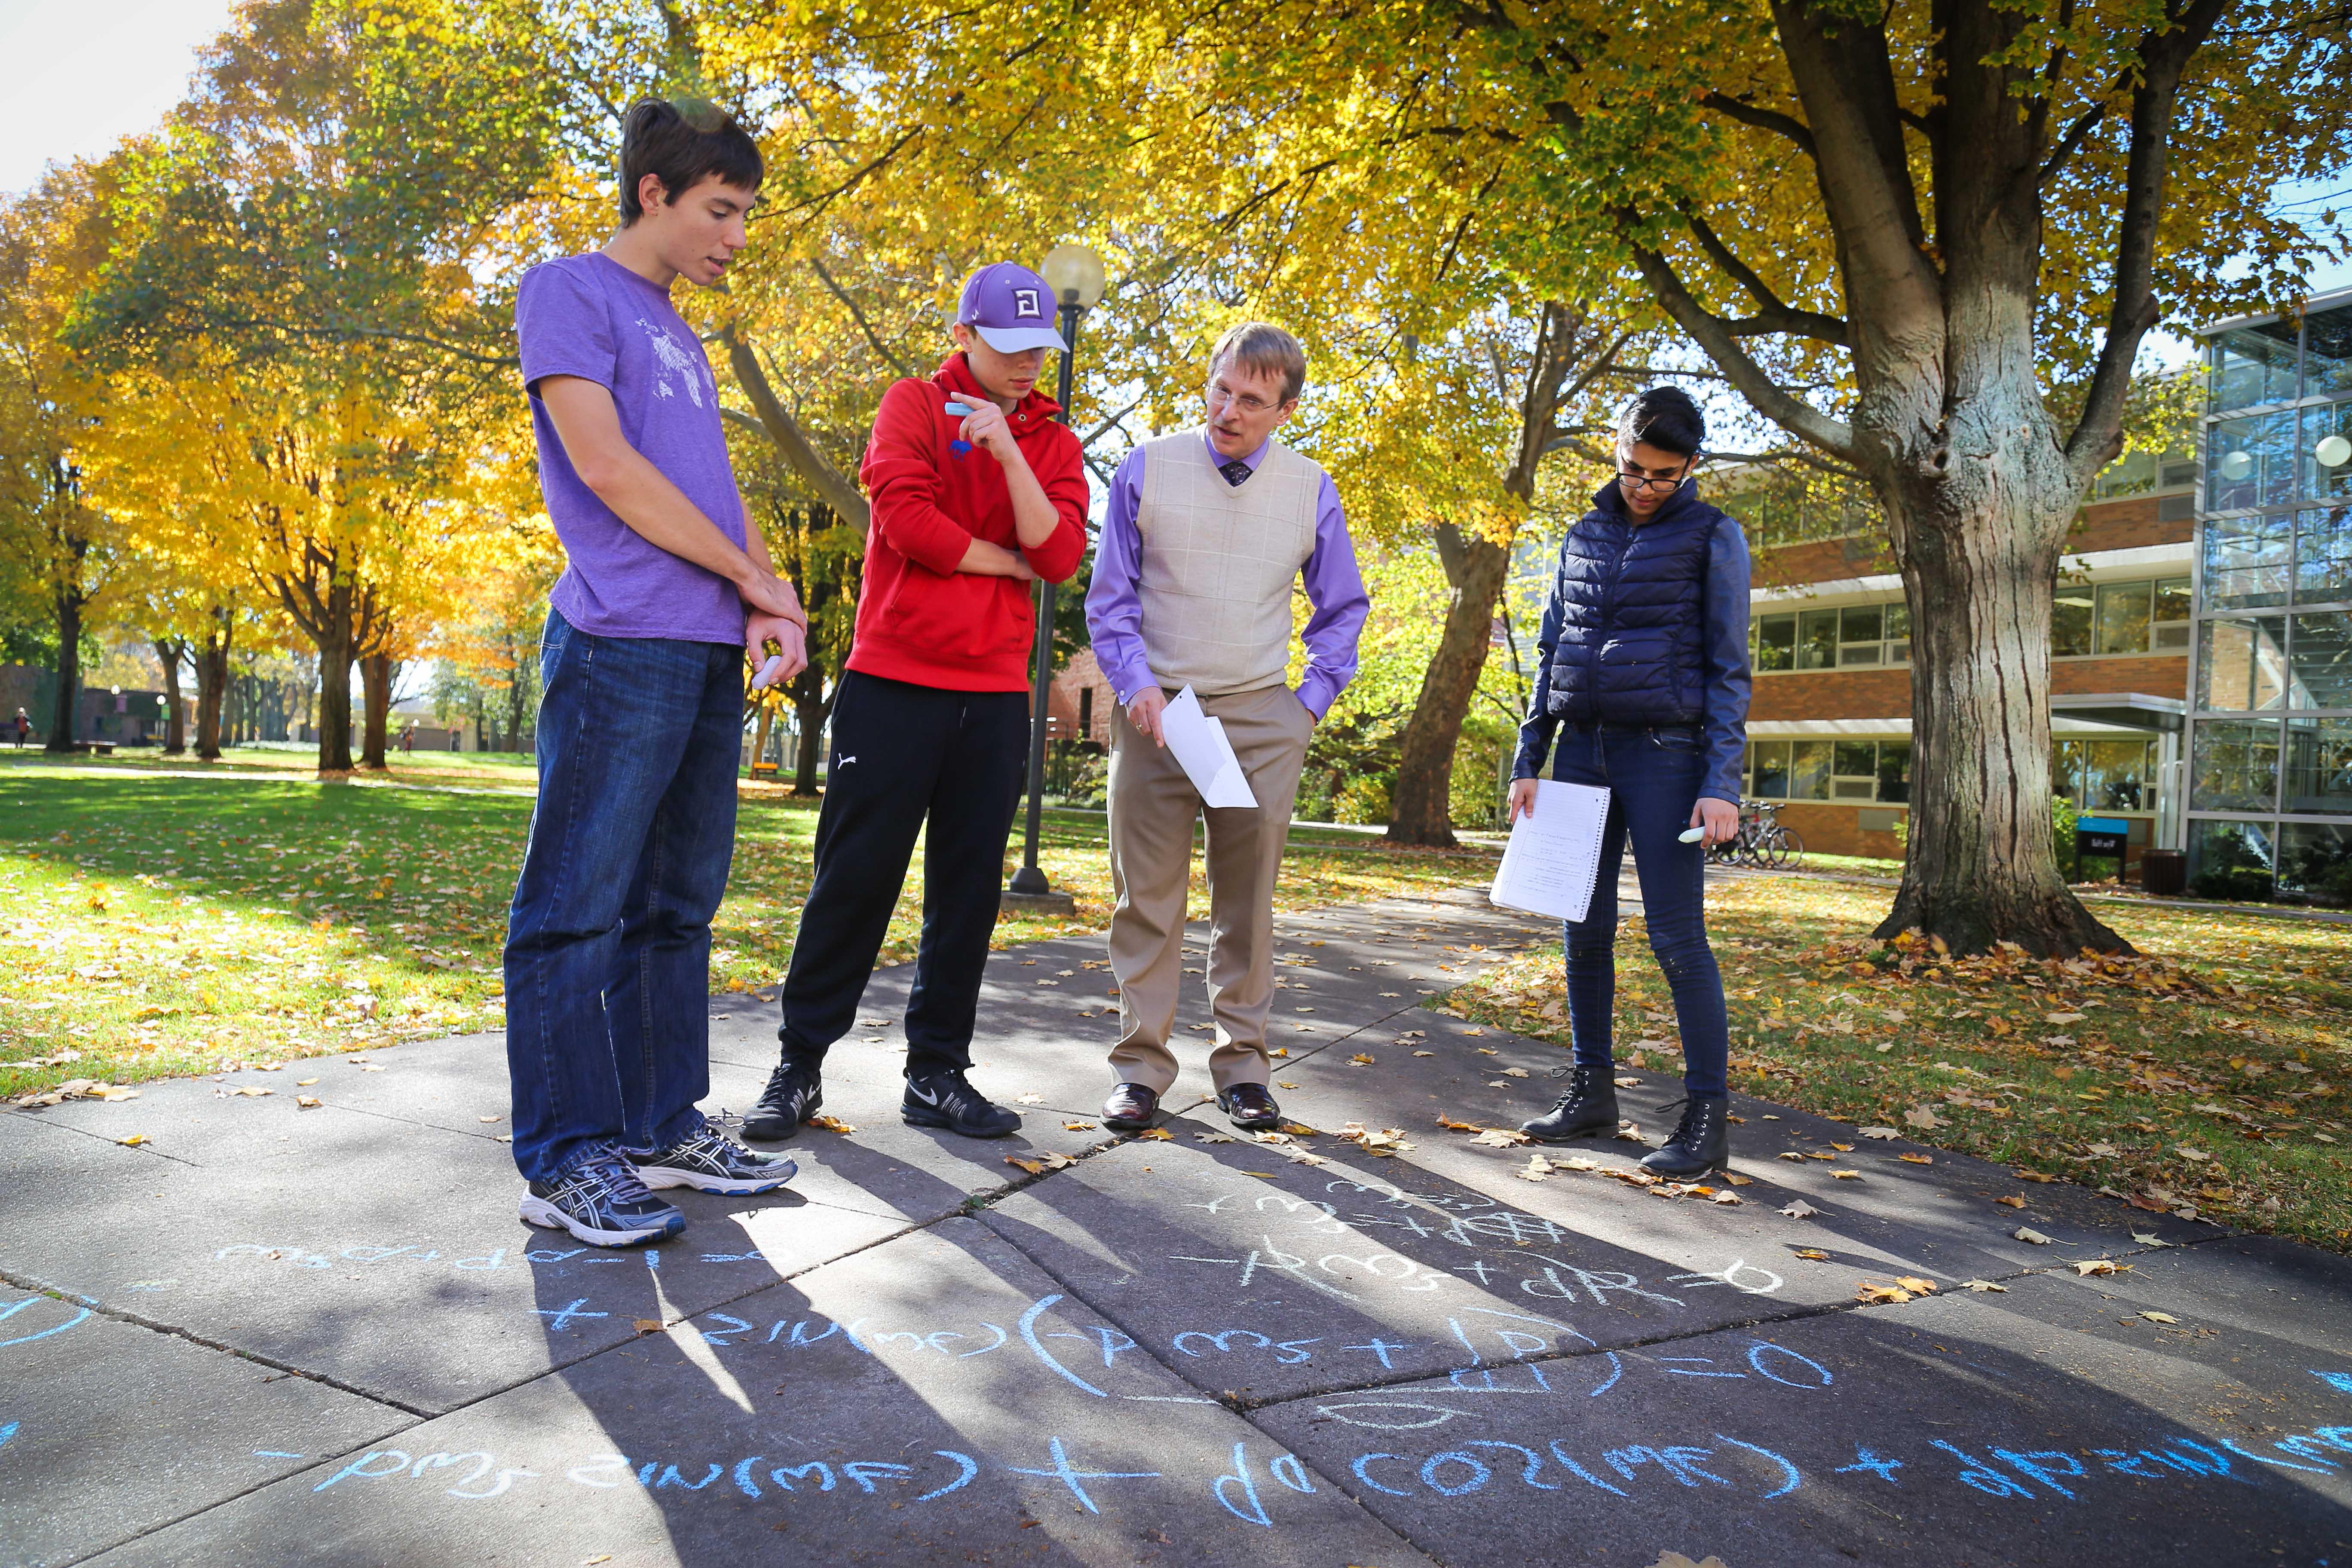 Math students with professor looking at equations on sidewalks